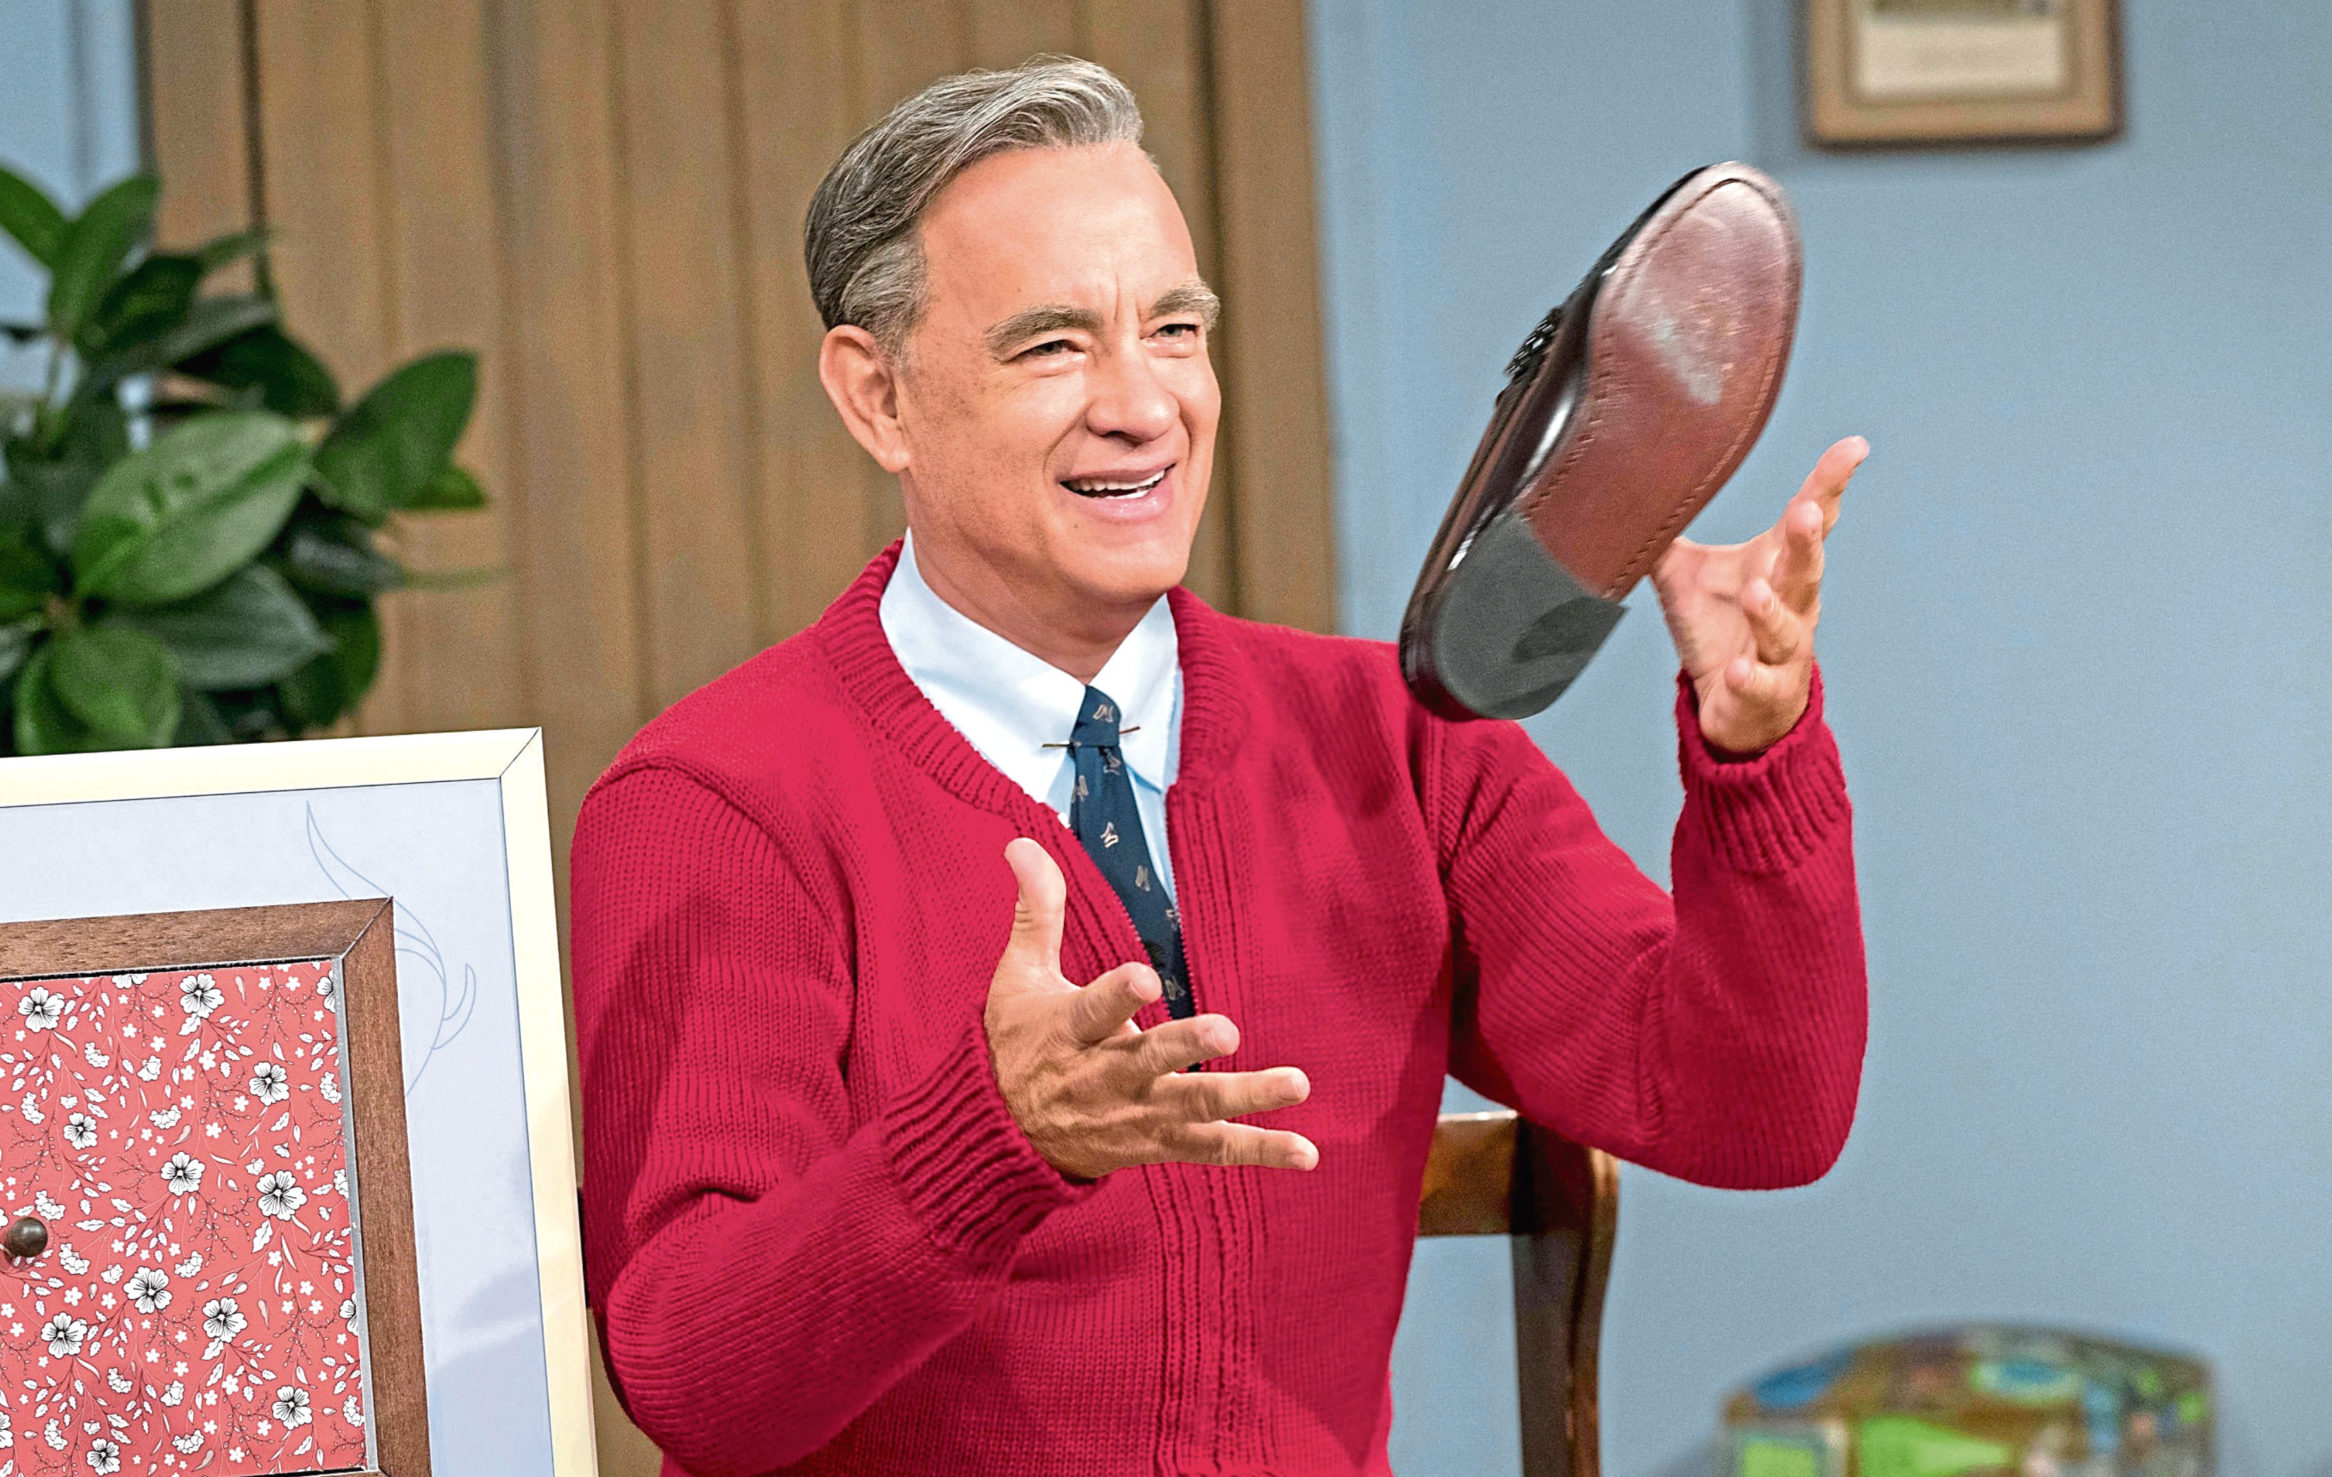 Tom Hanks stars as puppeteer, producer, Presbyterian minister and US television personality Fred Rogers